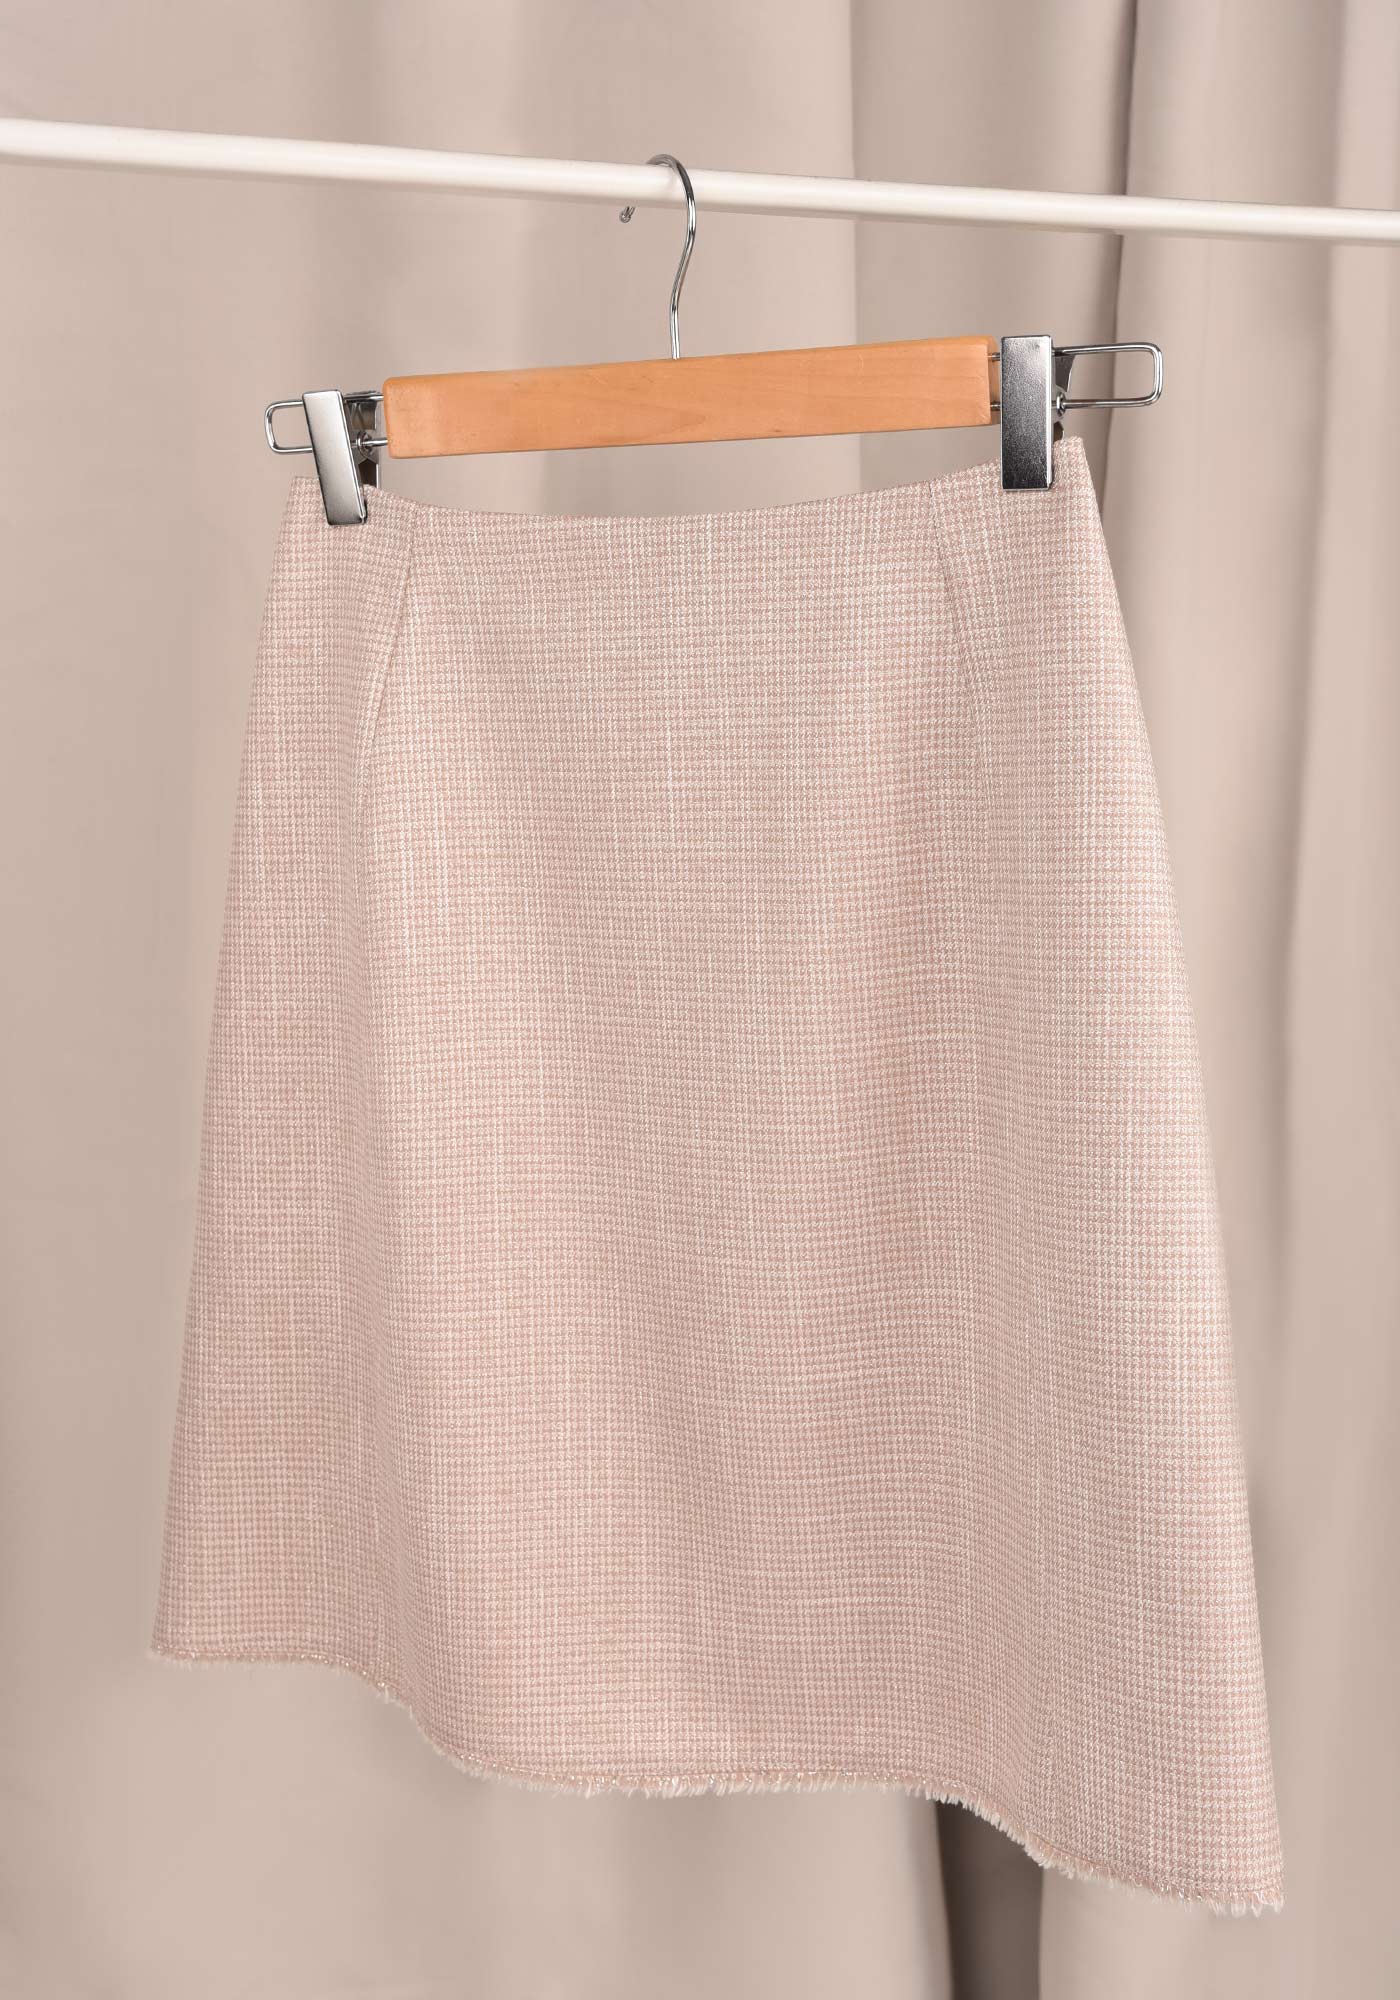 Women's Relaxed Raw Edge Crop Top in Silvery Blush Houndstooth